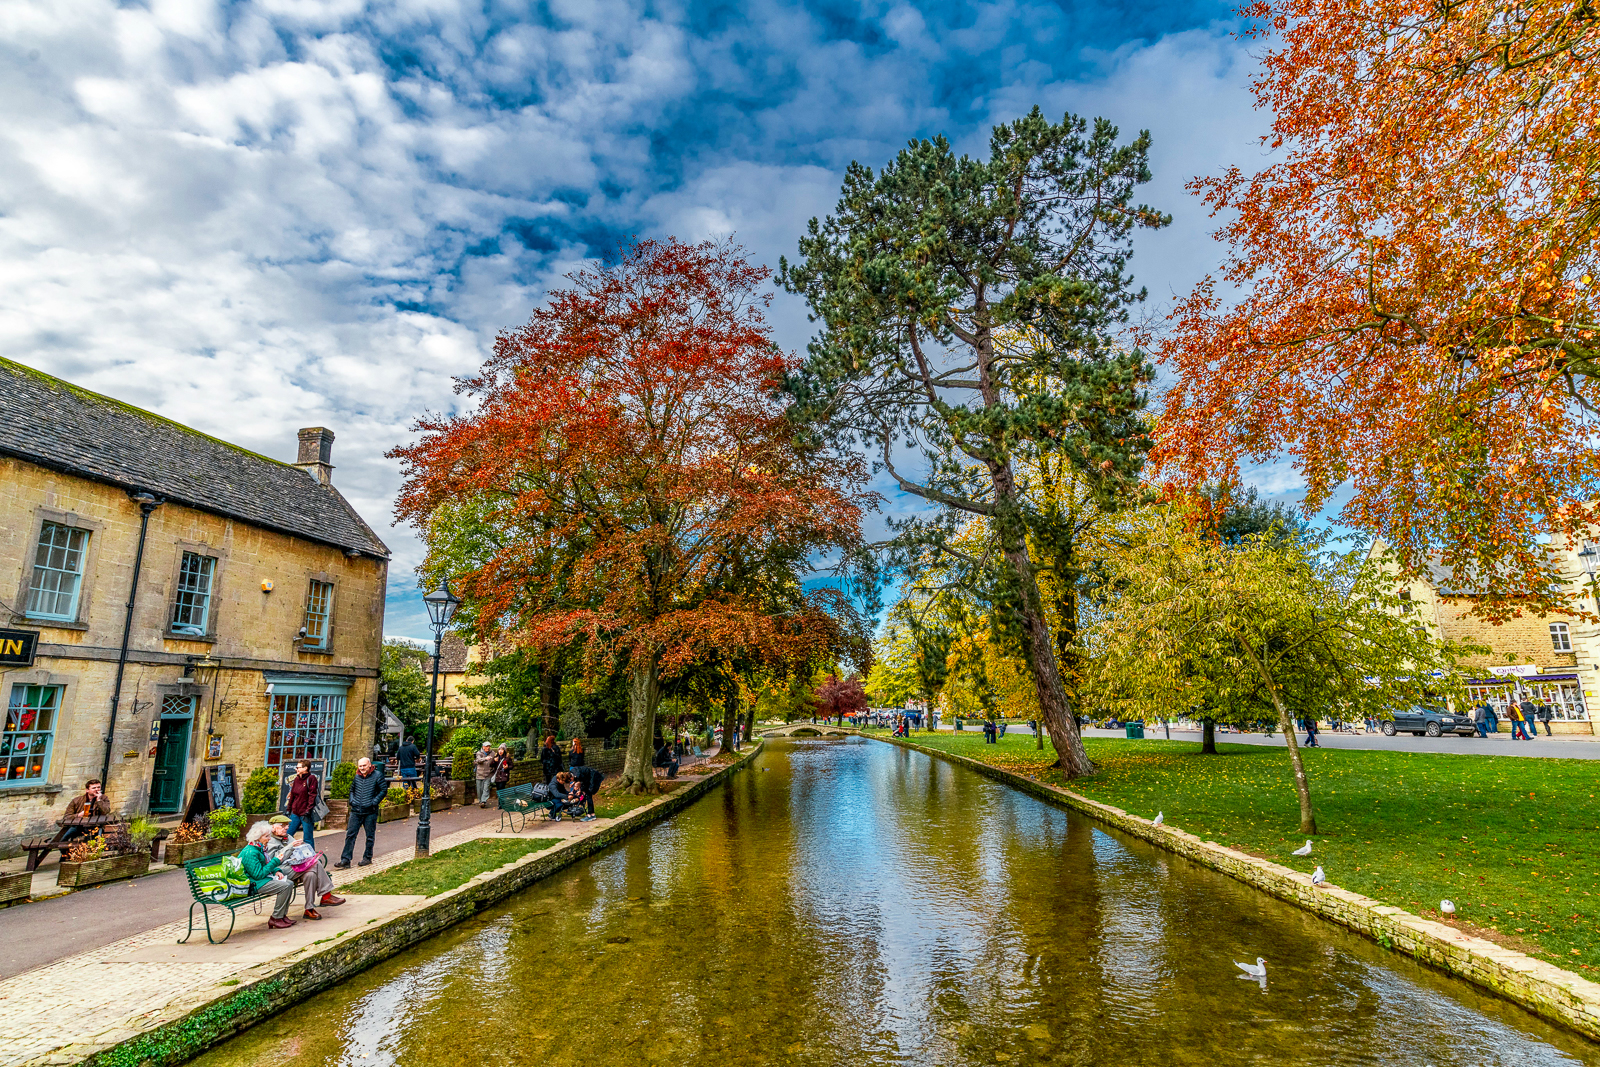 A river in Bourton on the Water in the Cotswolds